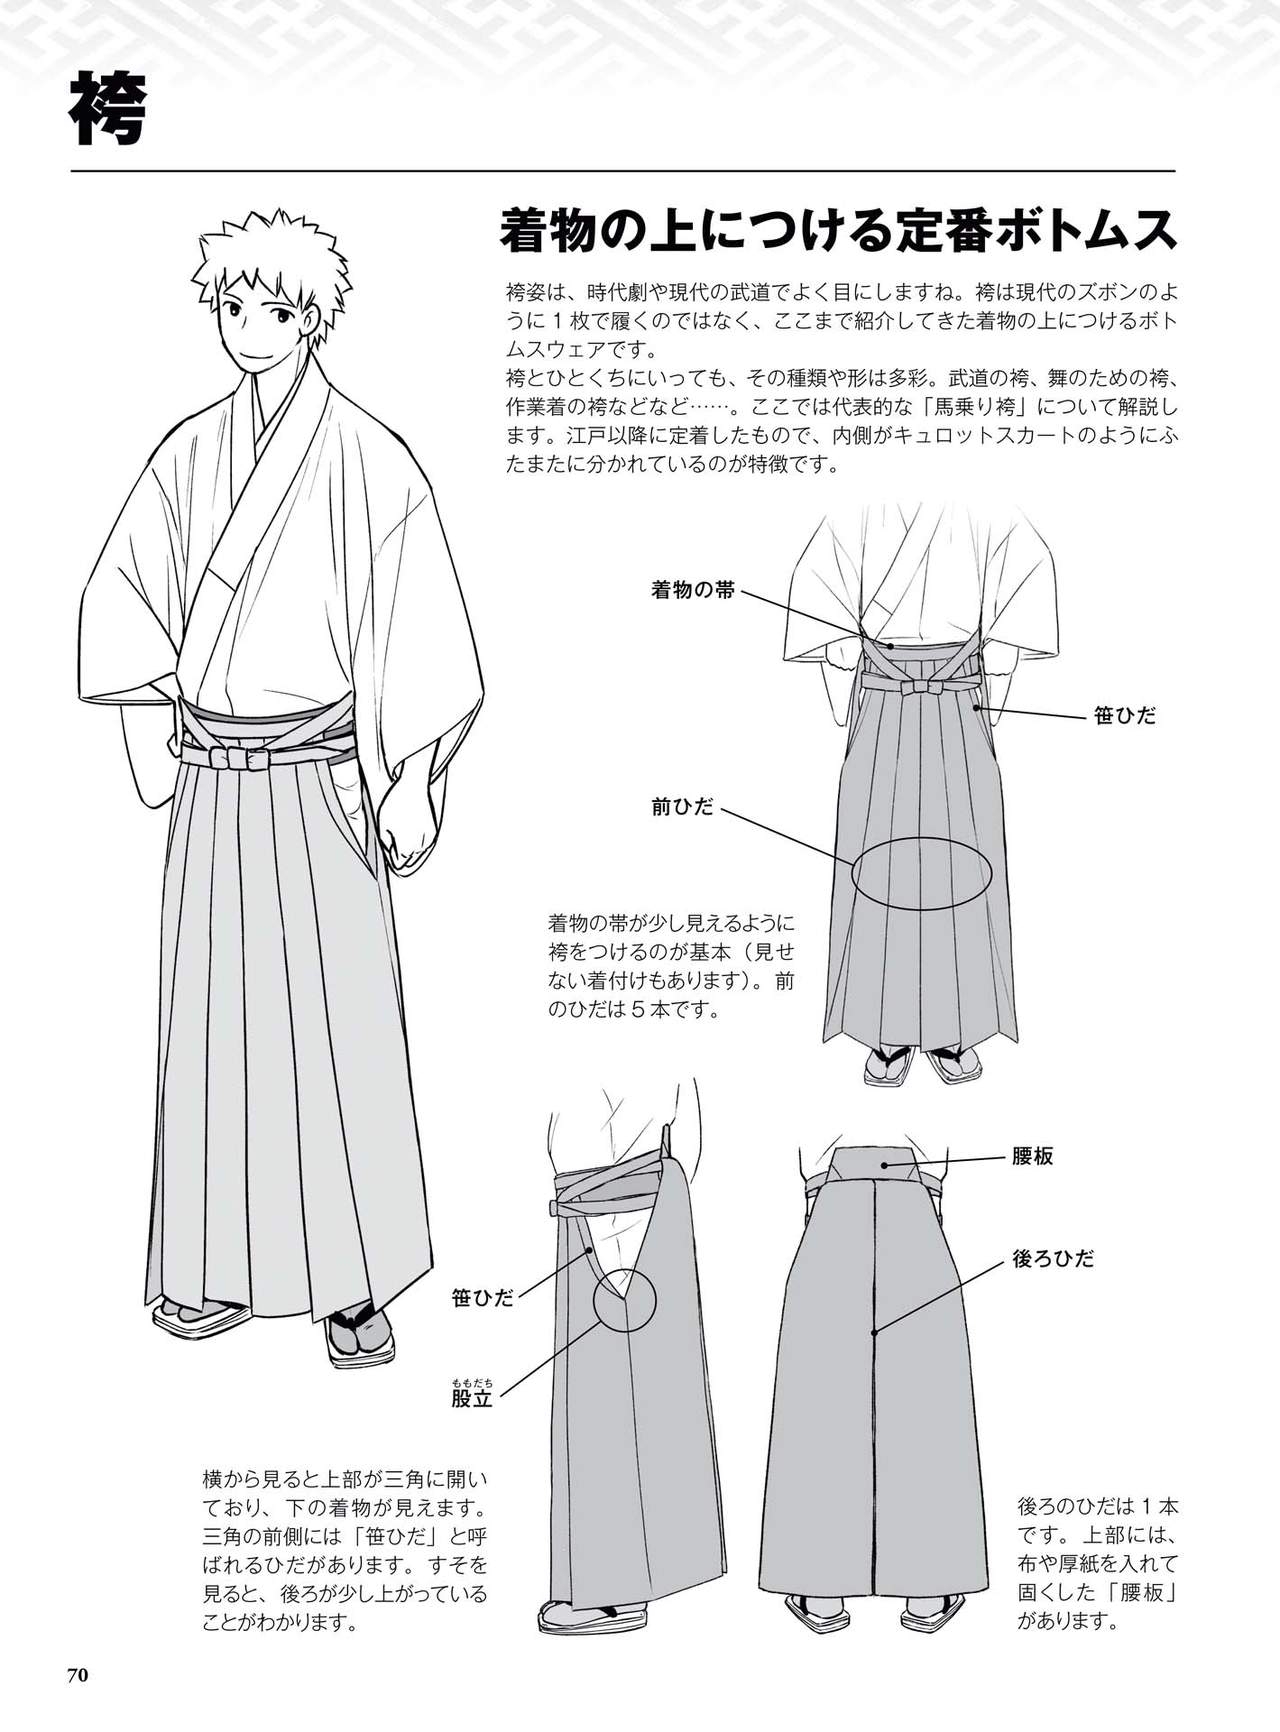 How to draw a kimono: From the basics to the point to advanced 71